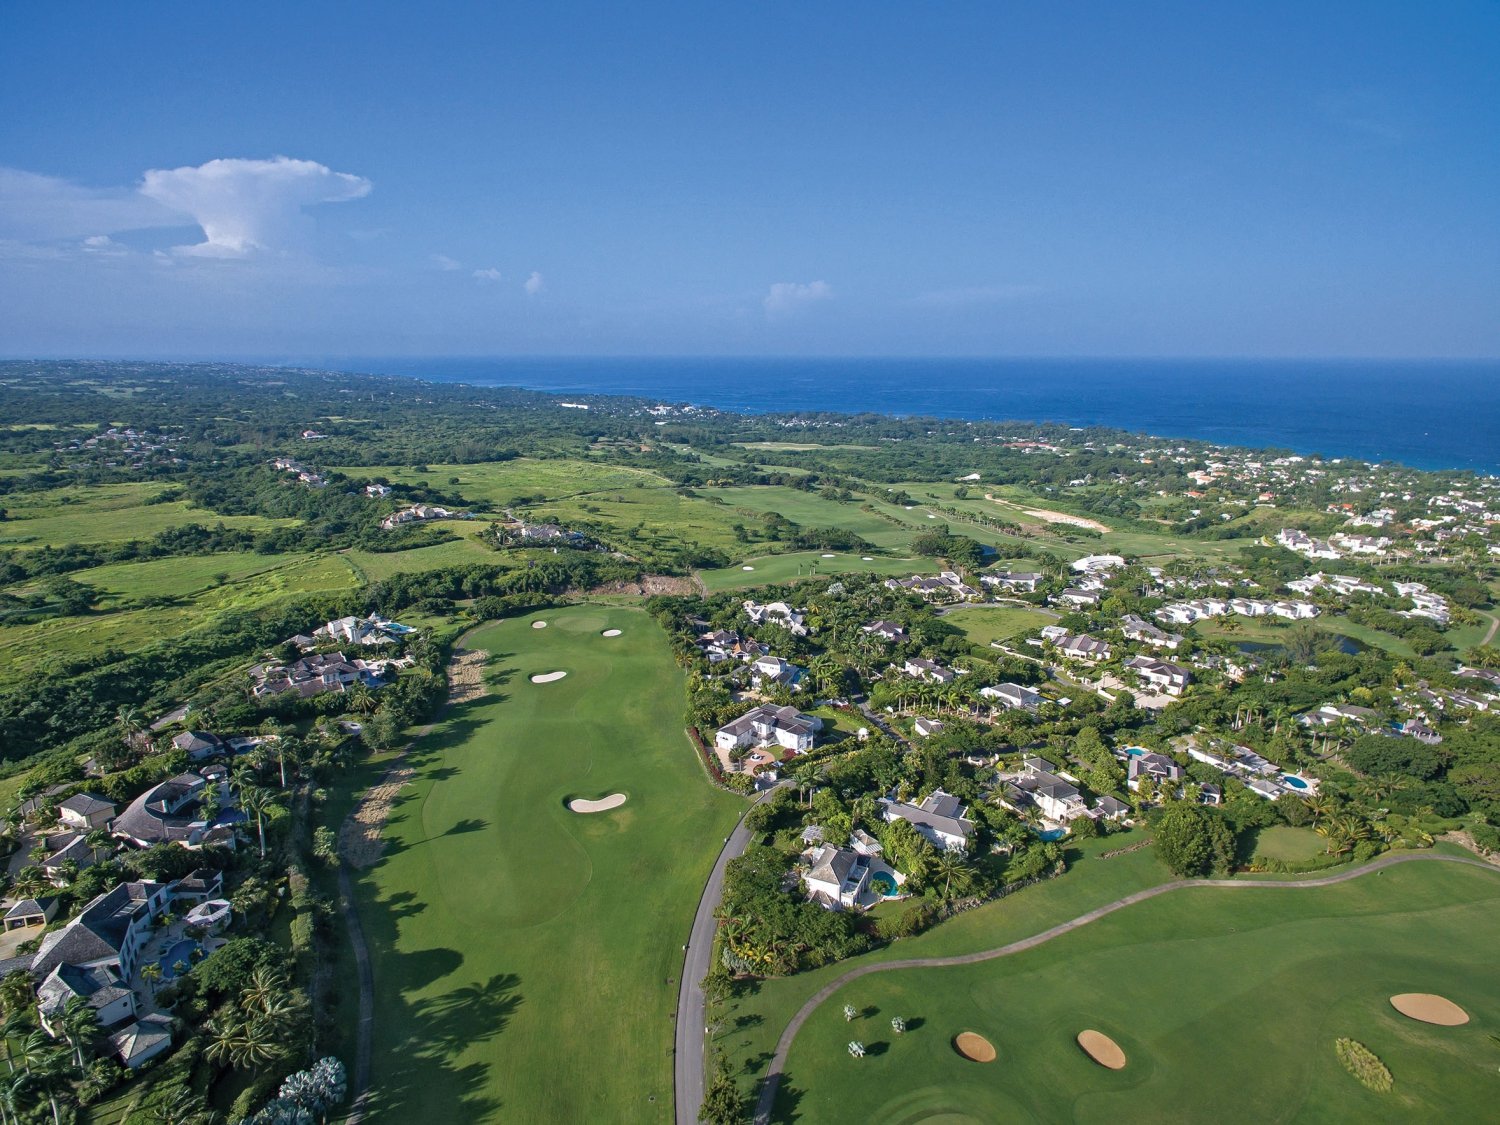 Best Golf Courses in Barbados